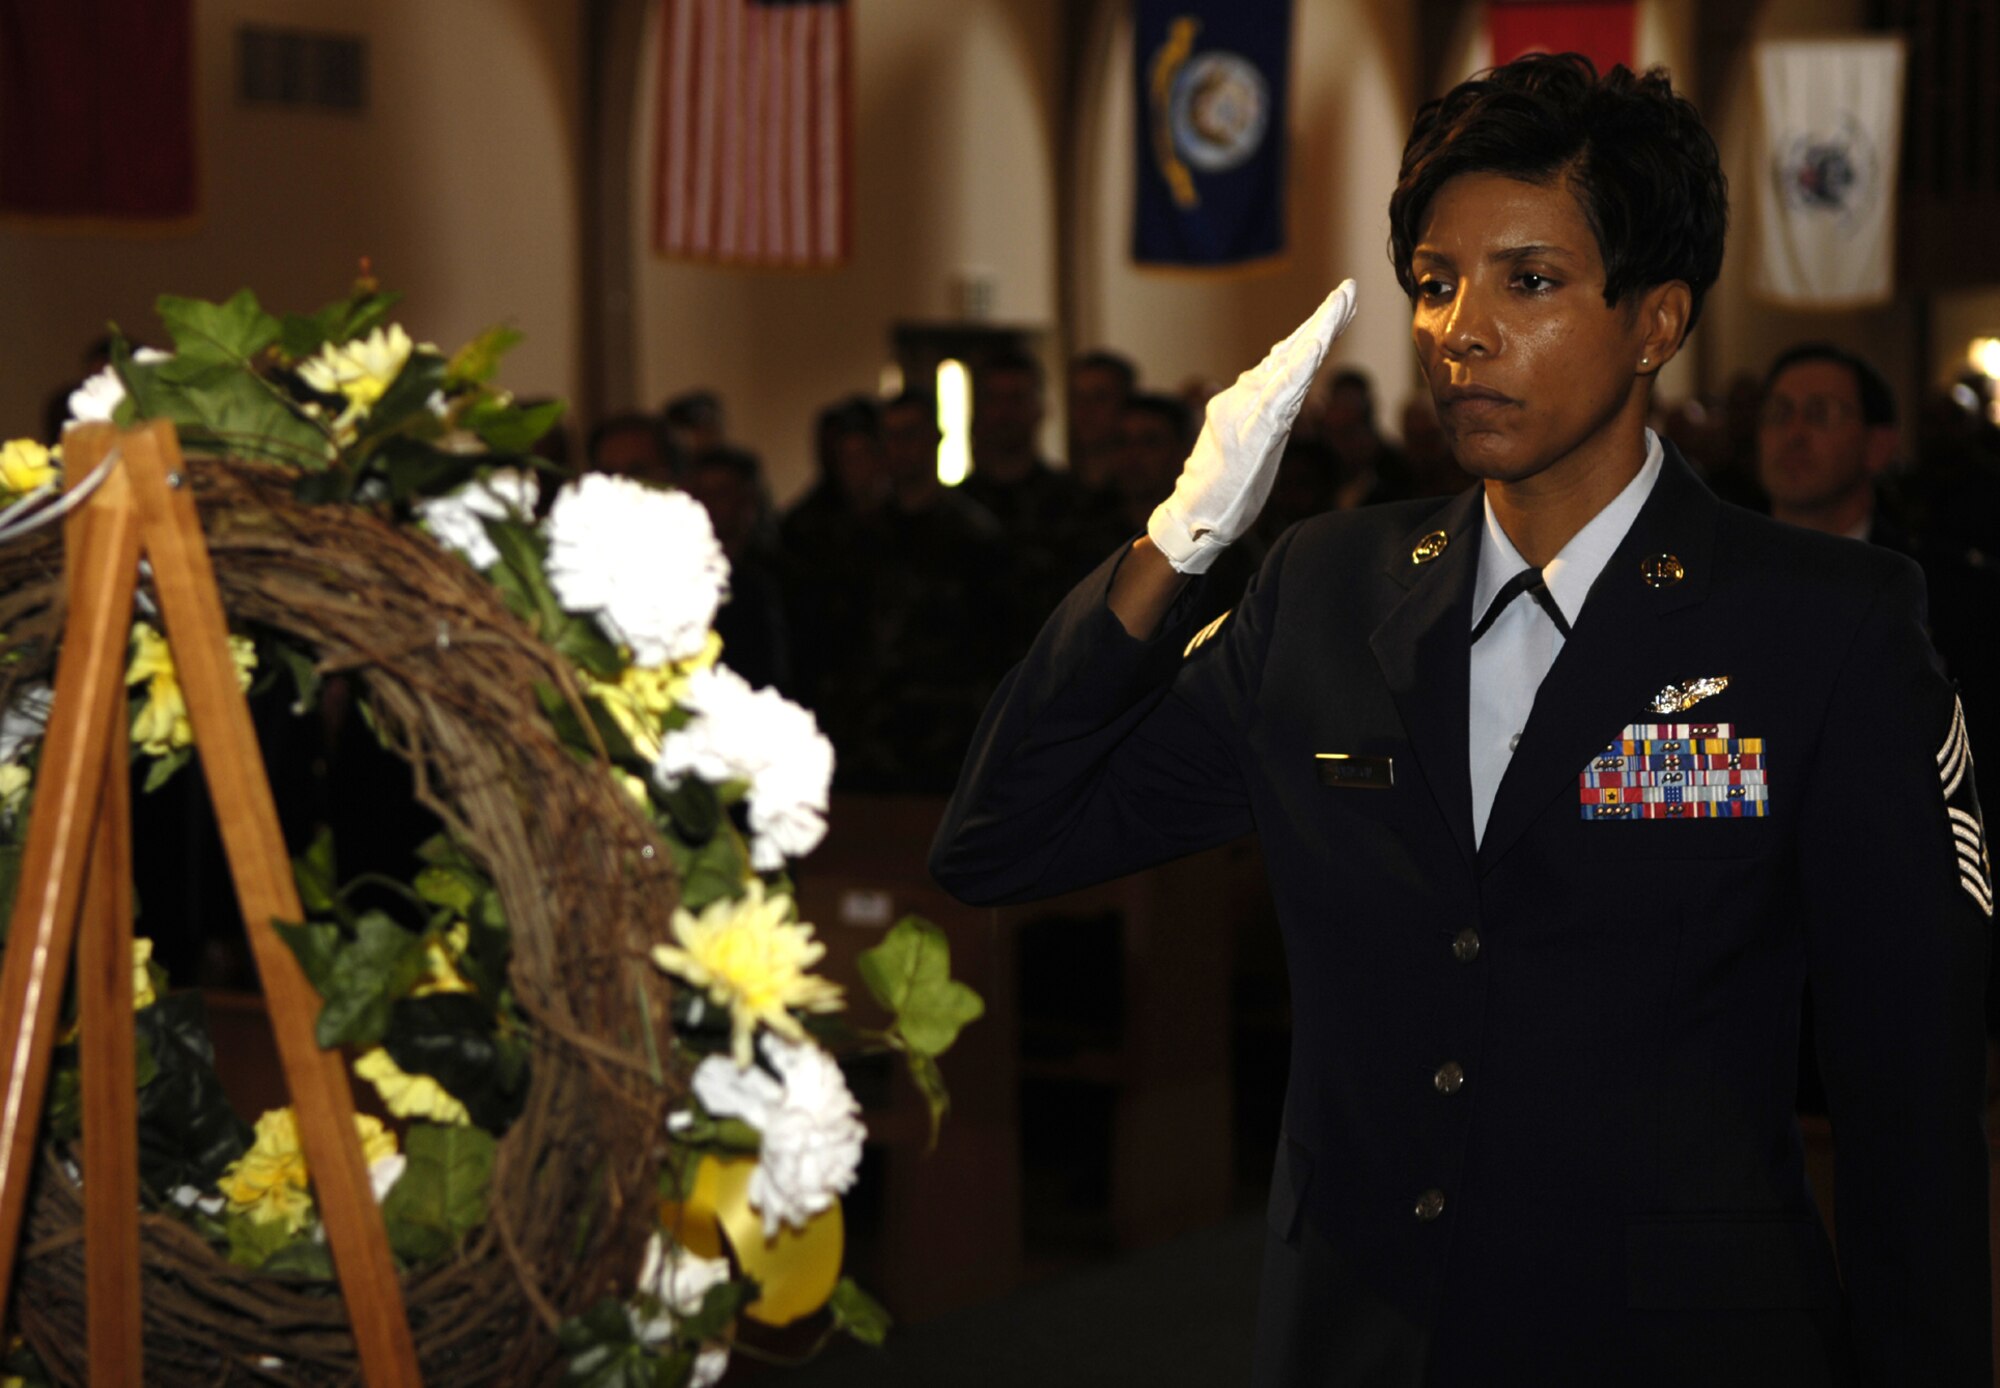 VANDENBERG AIR FORCE BASE, Calif.--Chief Master Sgt Cathy Johnson, 30th Medical Group, salutes a wreath during the POW/MIA Ceremony on Sep. 21. Vandenberg gathered for the remembrance ceremony to honor fallen Airmen, Soldiers, Seamen and Marines.(U.S. Air Force photo/Airman 1st Class Cole Presley)